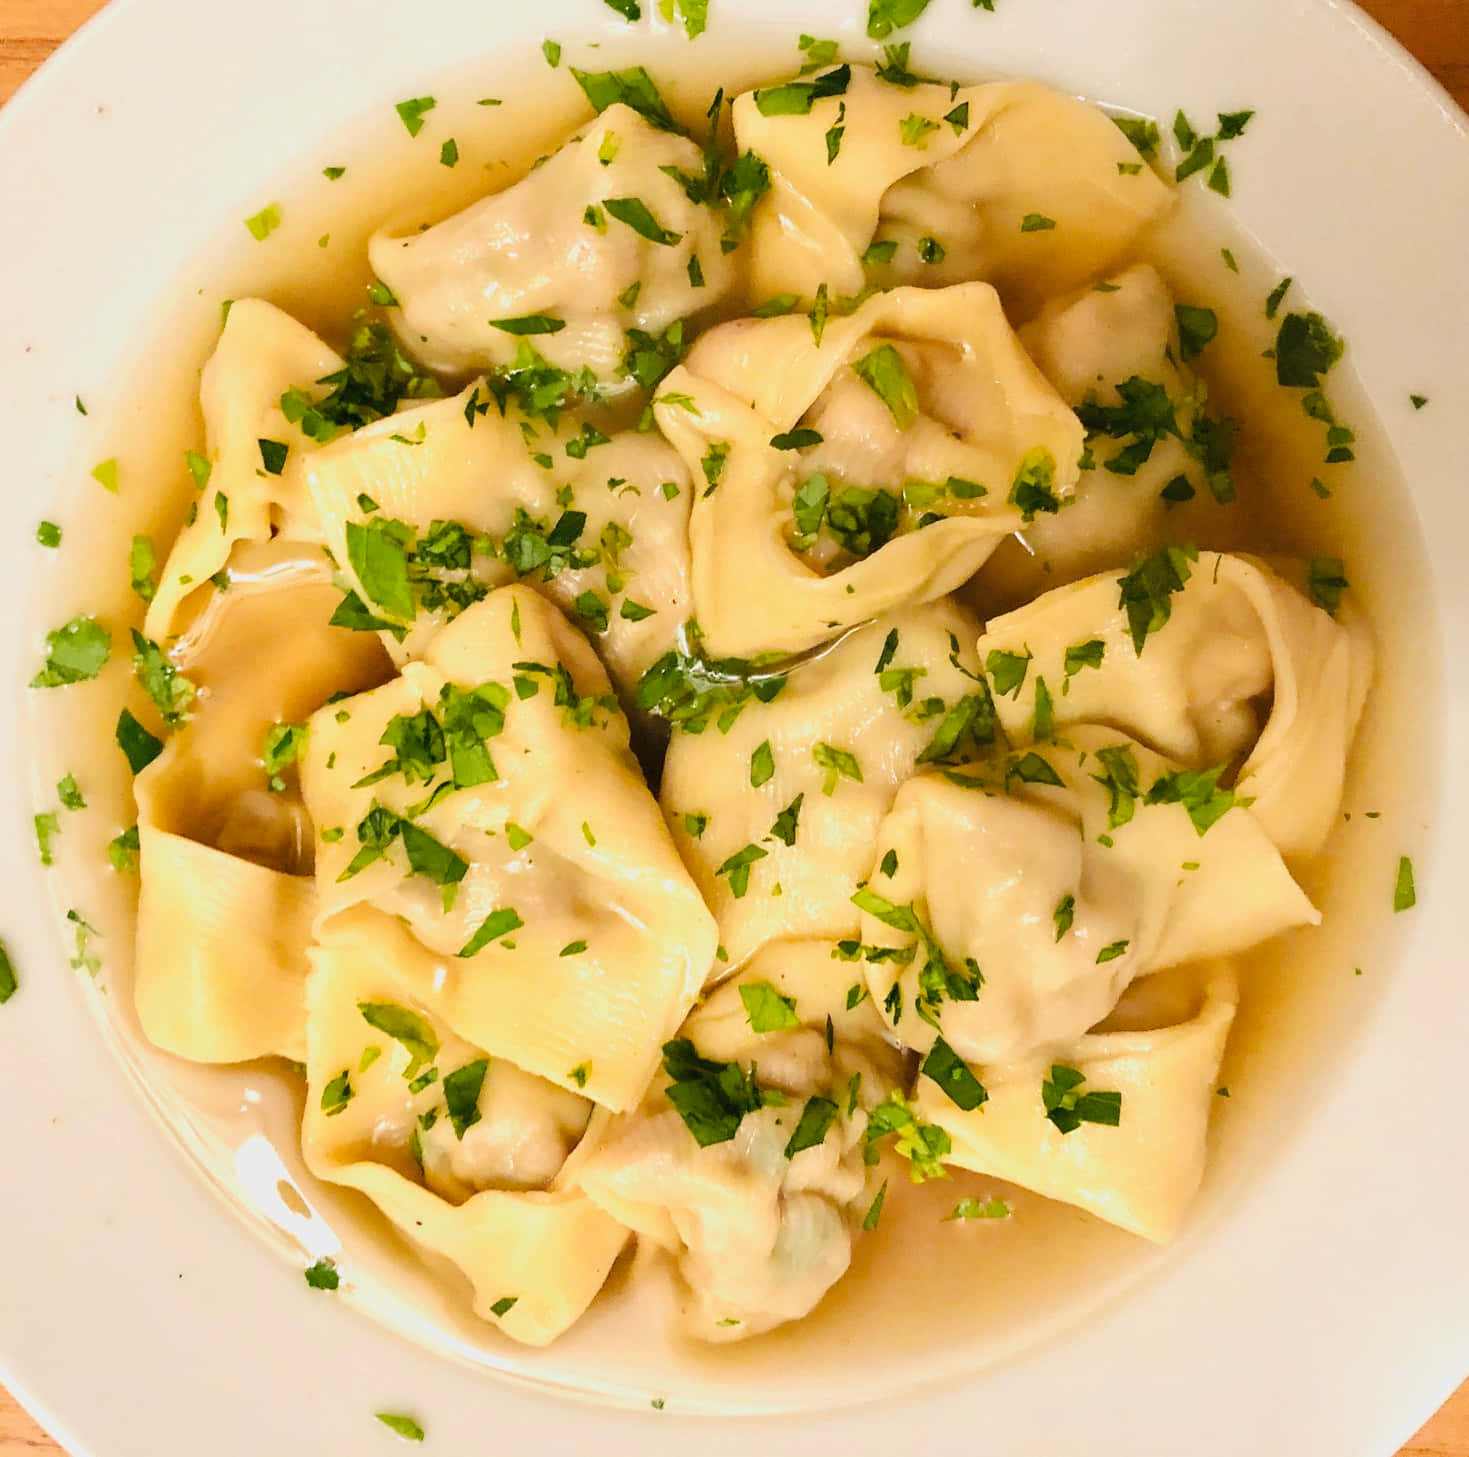 Authentic Tortellini in Brodo garnished with Fresh Greens Wallpaper